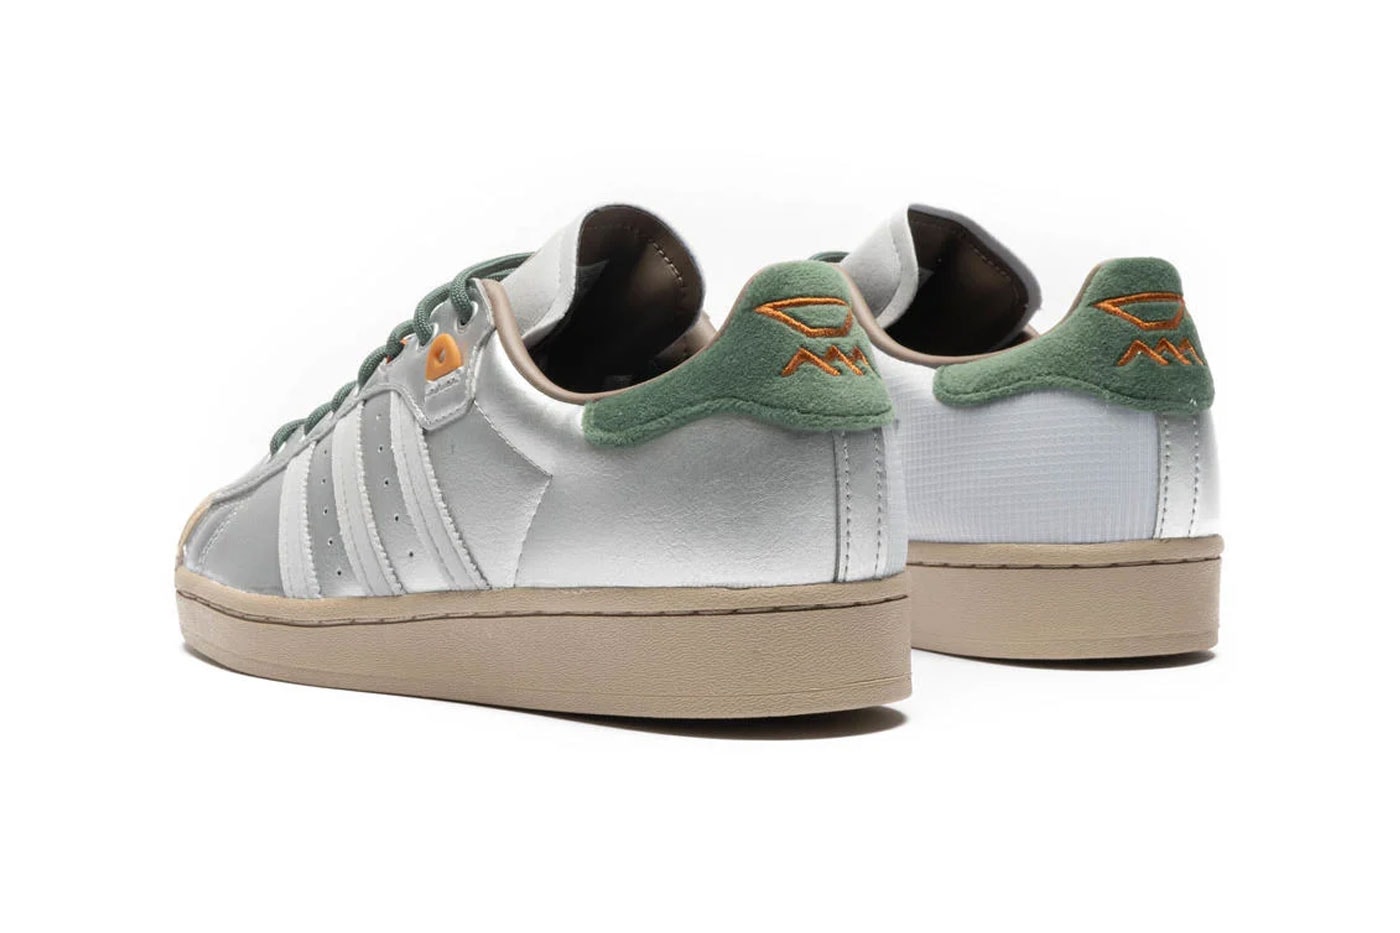 adidas Originals Superstar yanwai hp2361 msilve greoxi teccop silver green leather synthetic tan orange release info